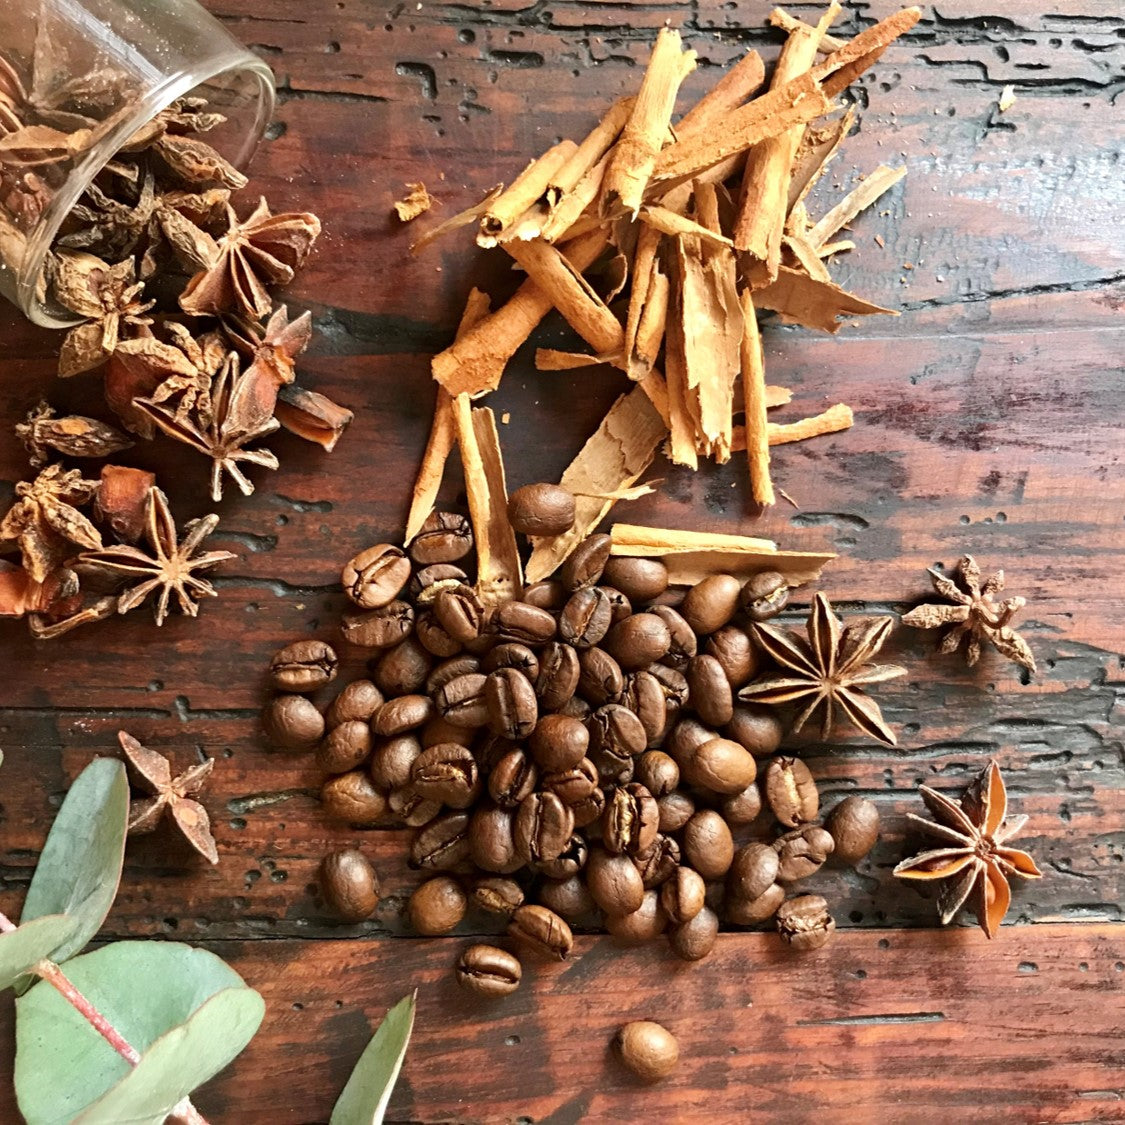 Mexico 1492 - Coffee beans with cinnamon